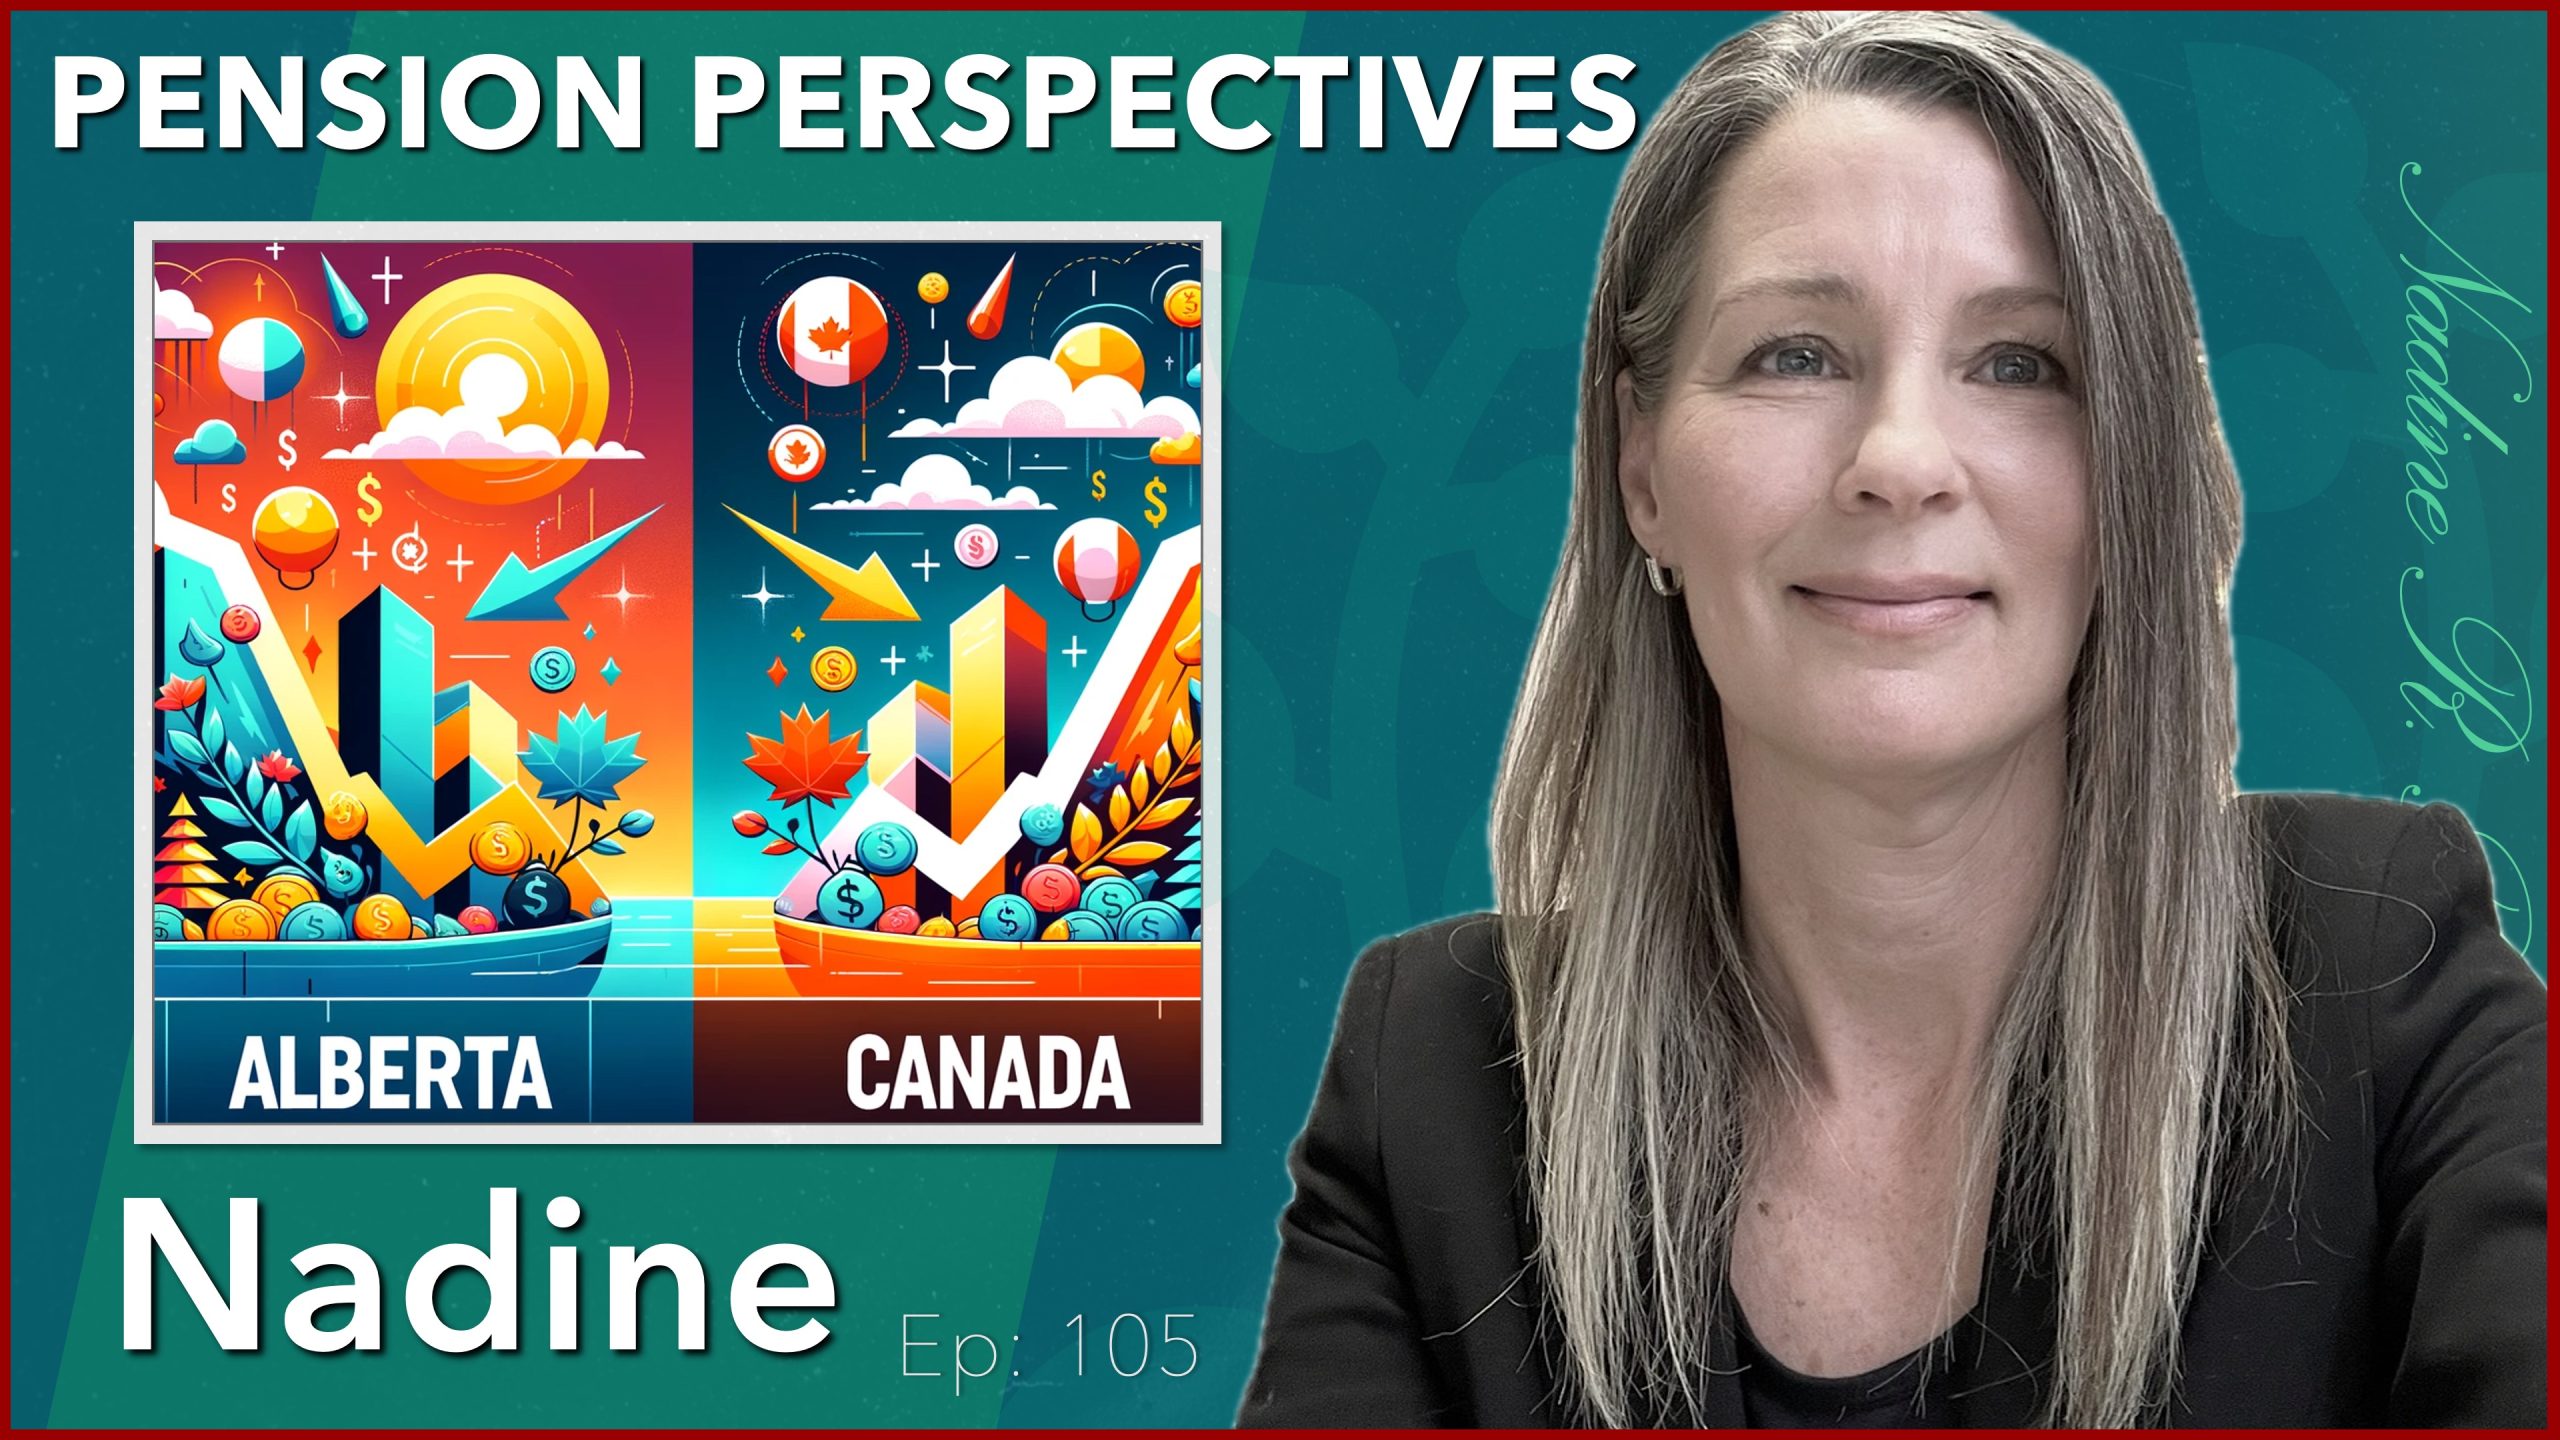 Nadine Wellwood in Pension Perspectives video, Episode number displayed.